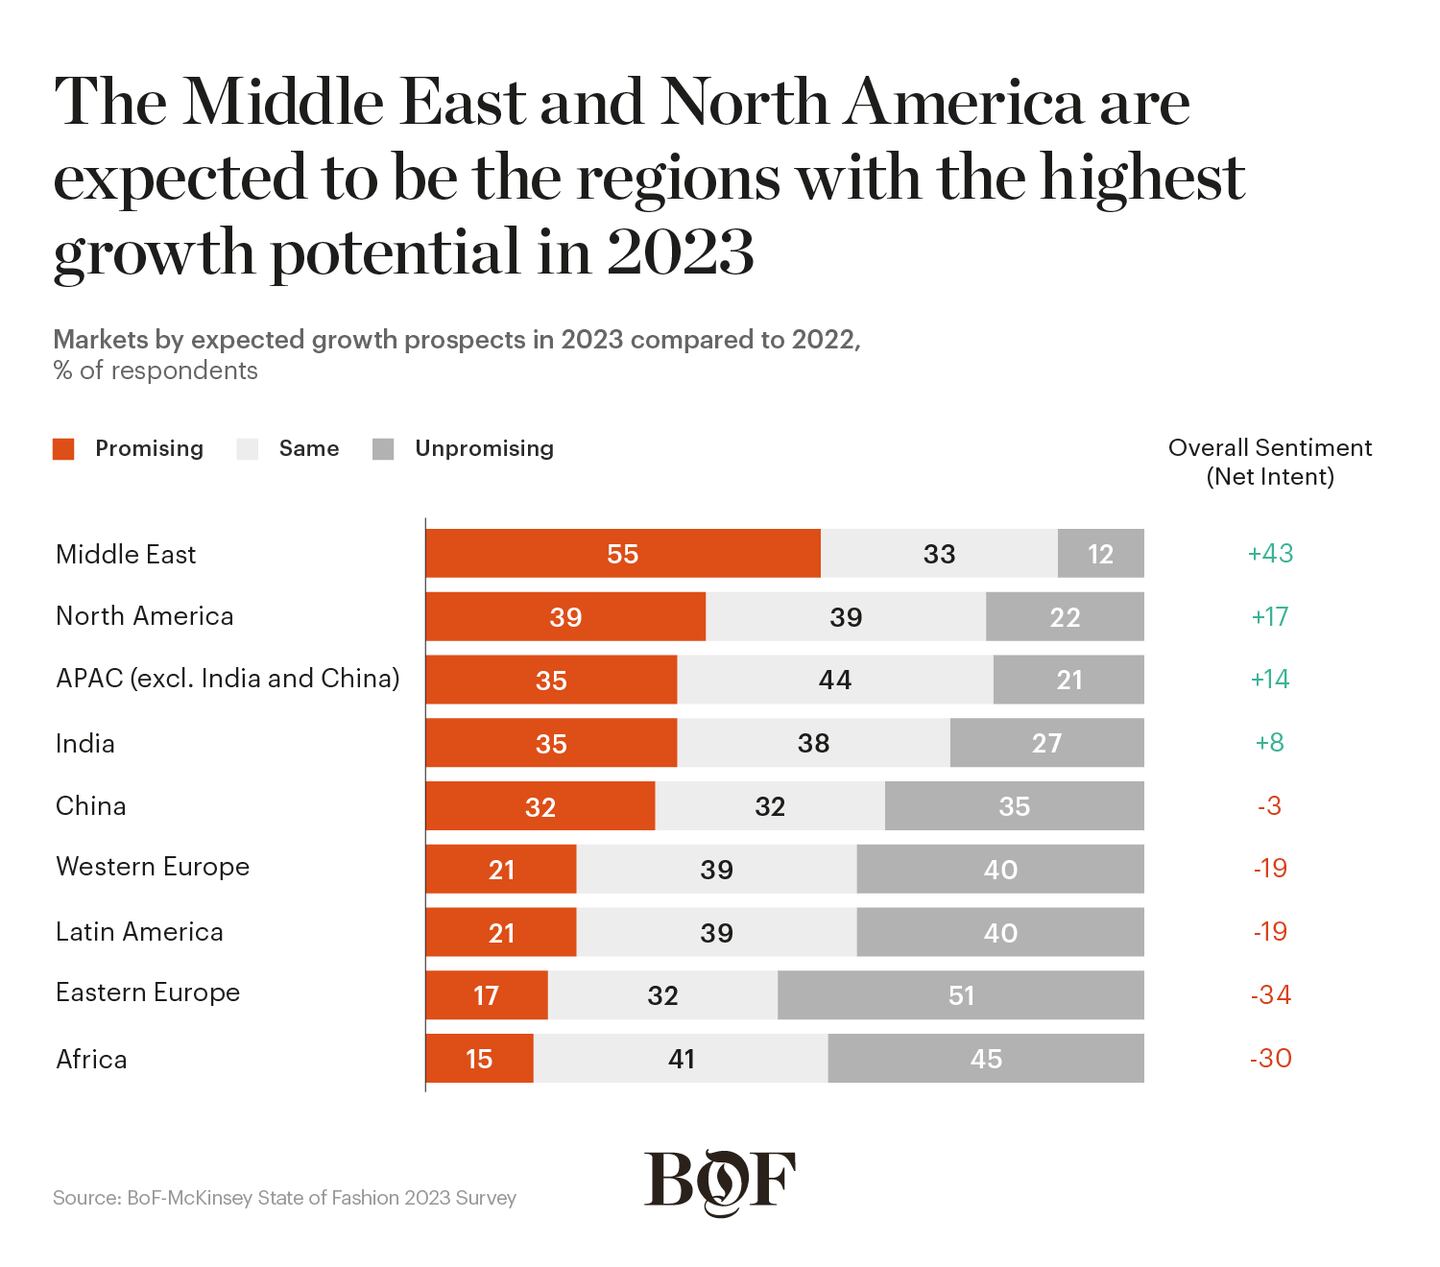 Chart showing 2023 growth potential by region